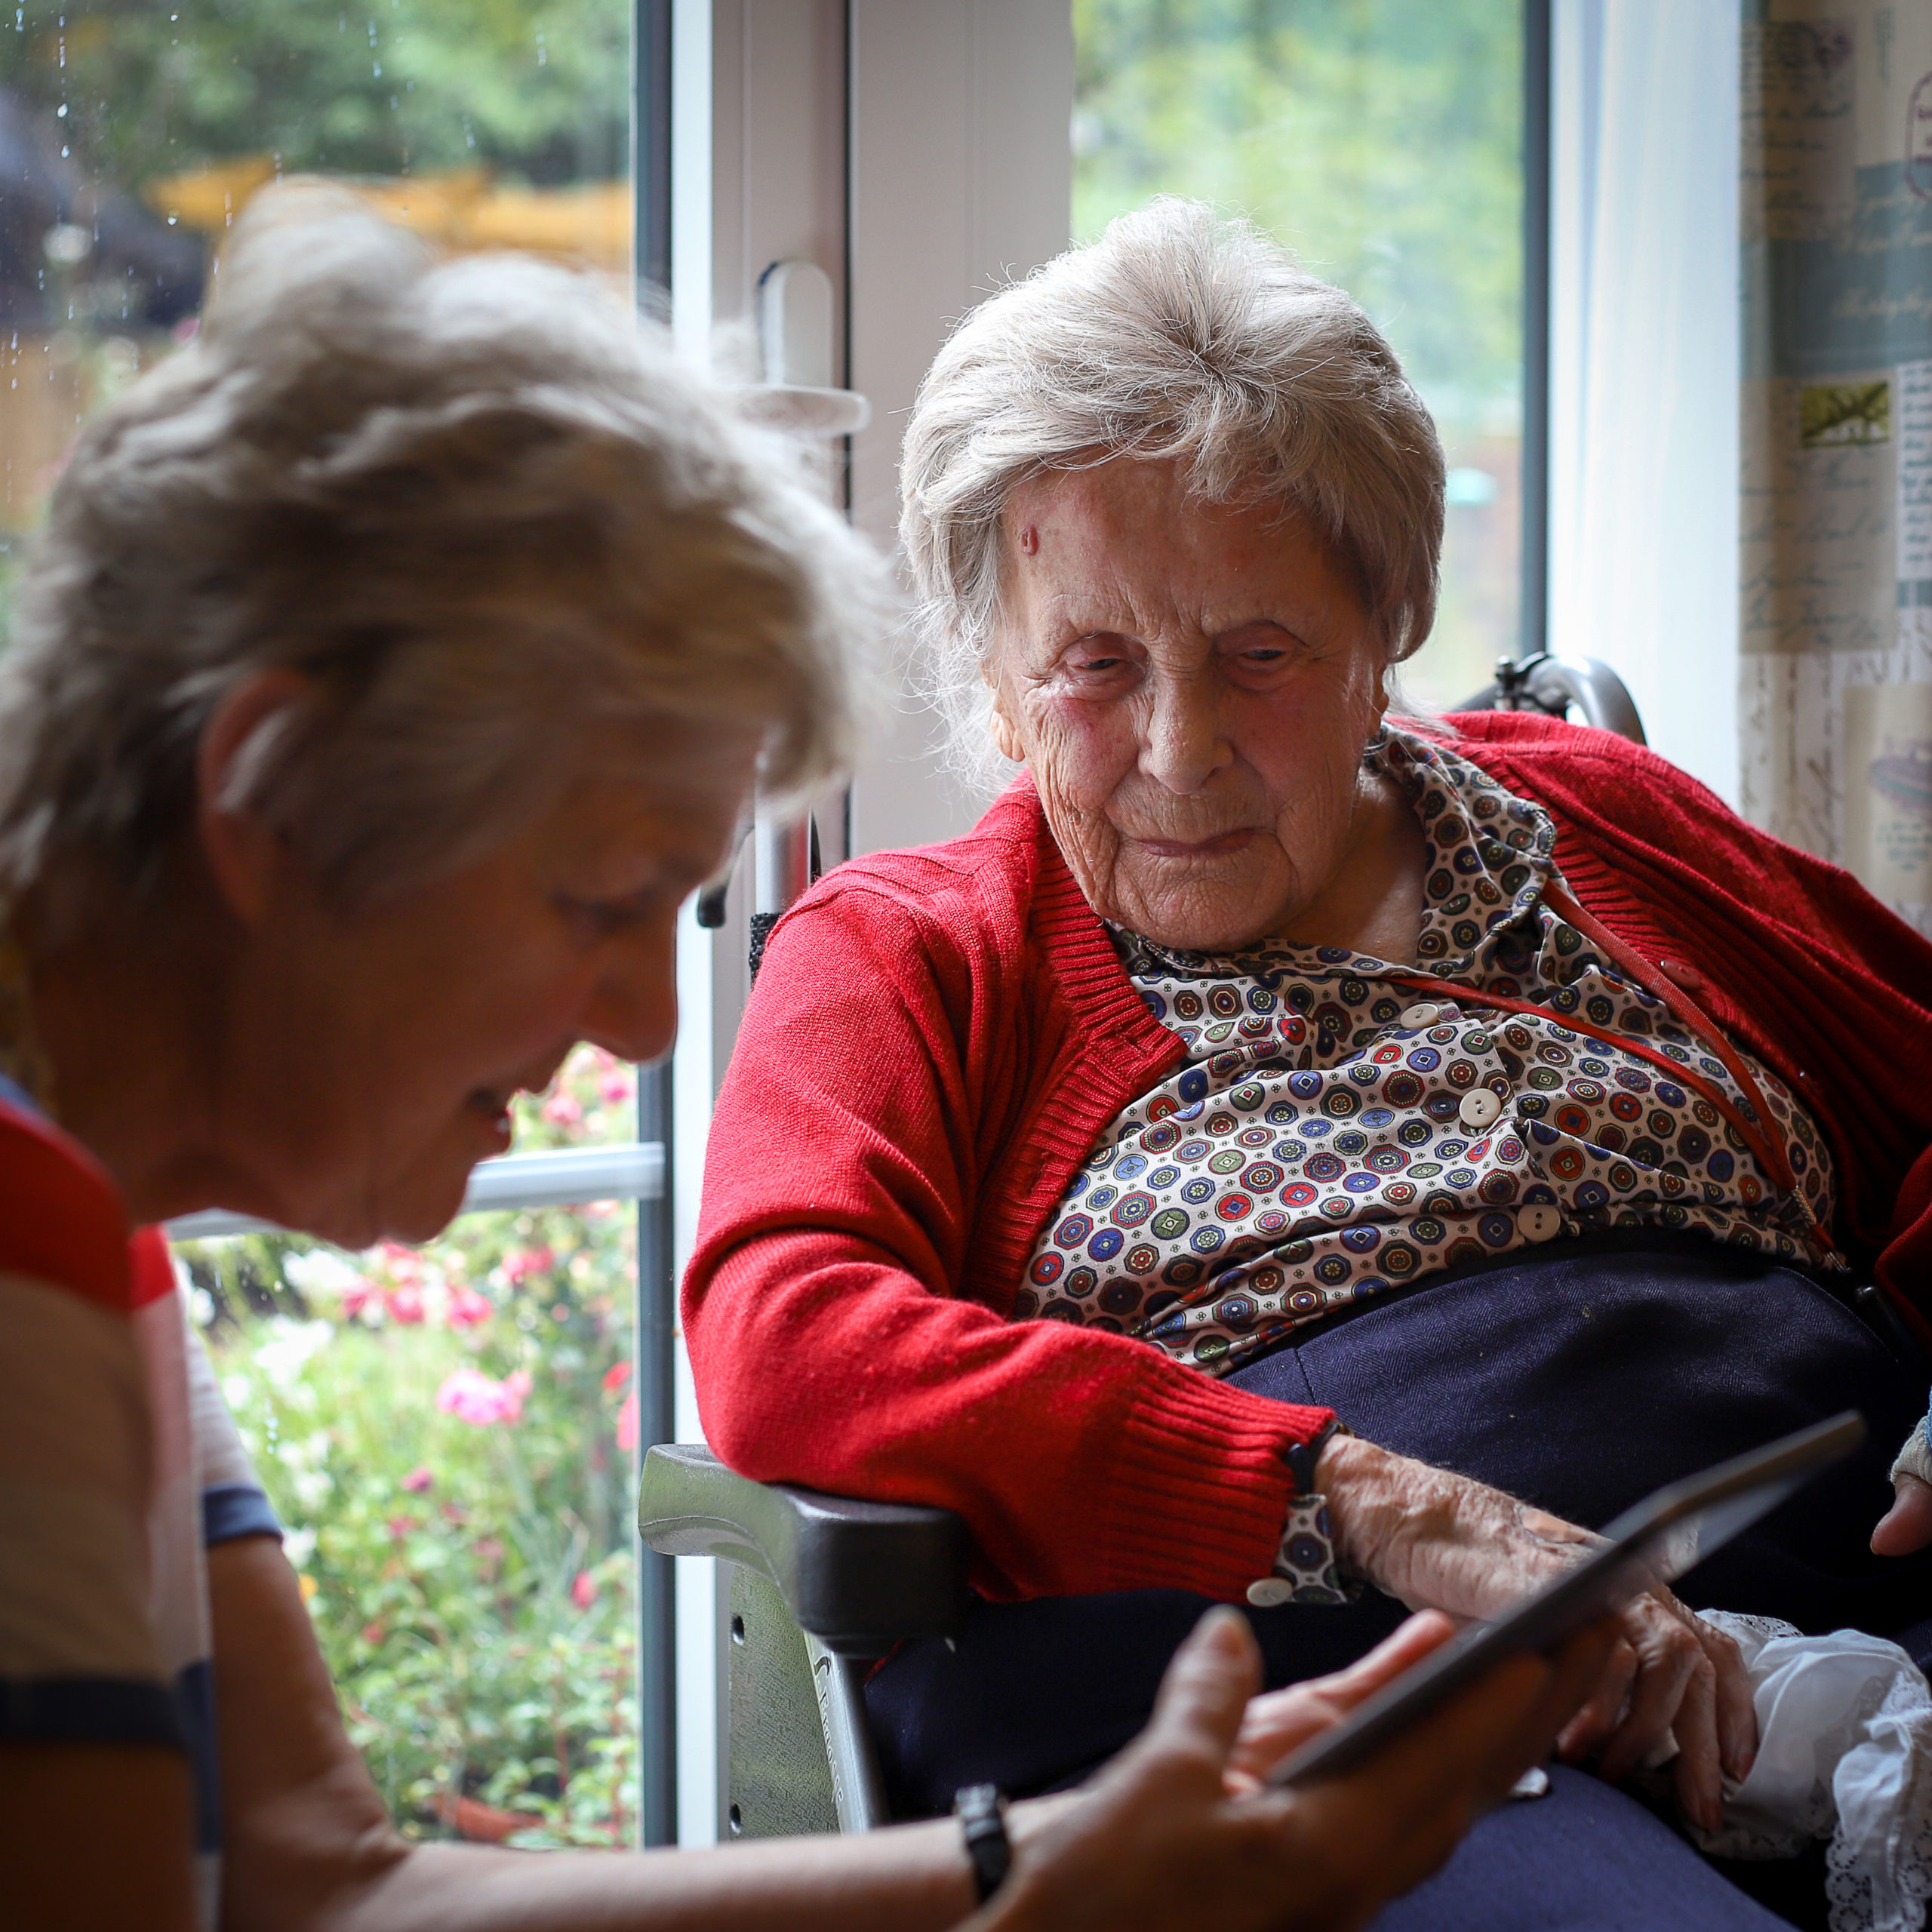 Five benefits of building a carer support network